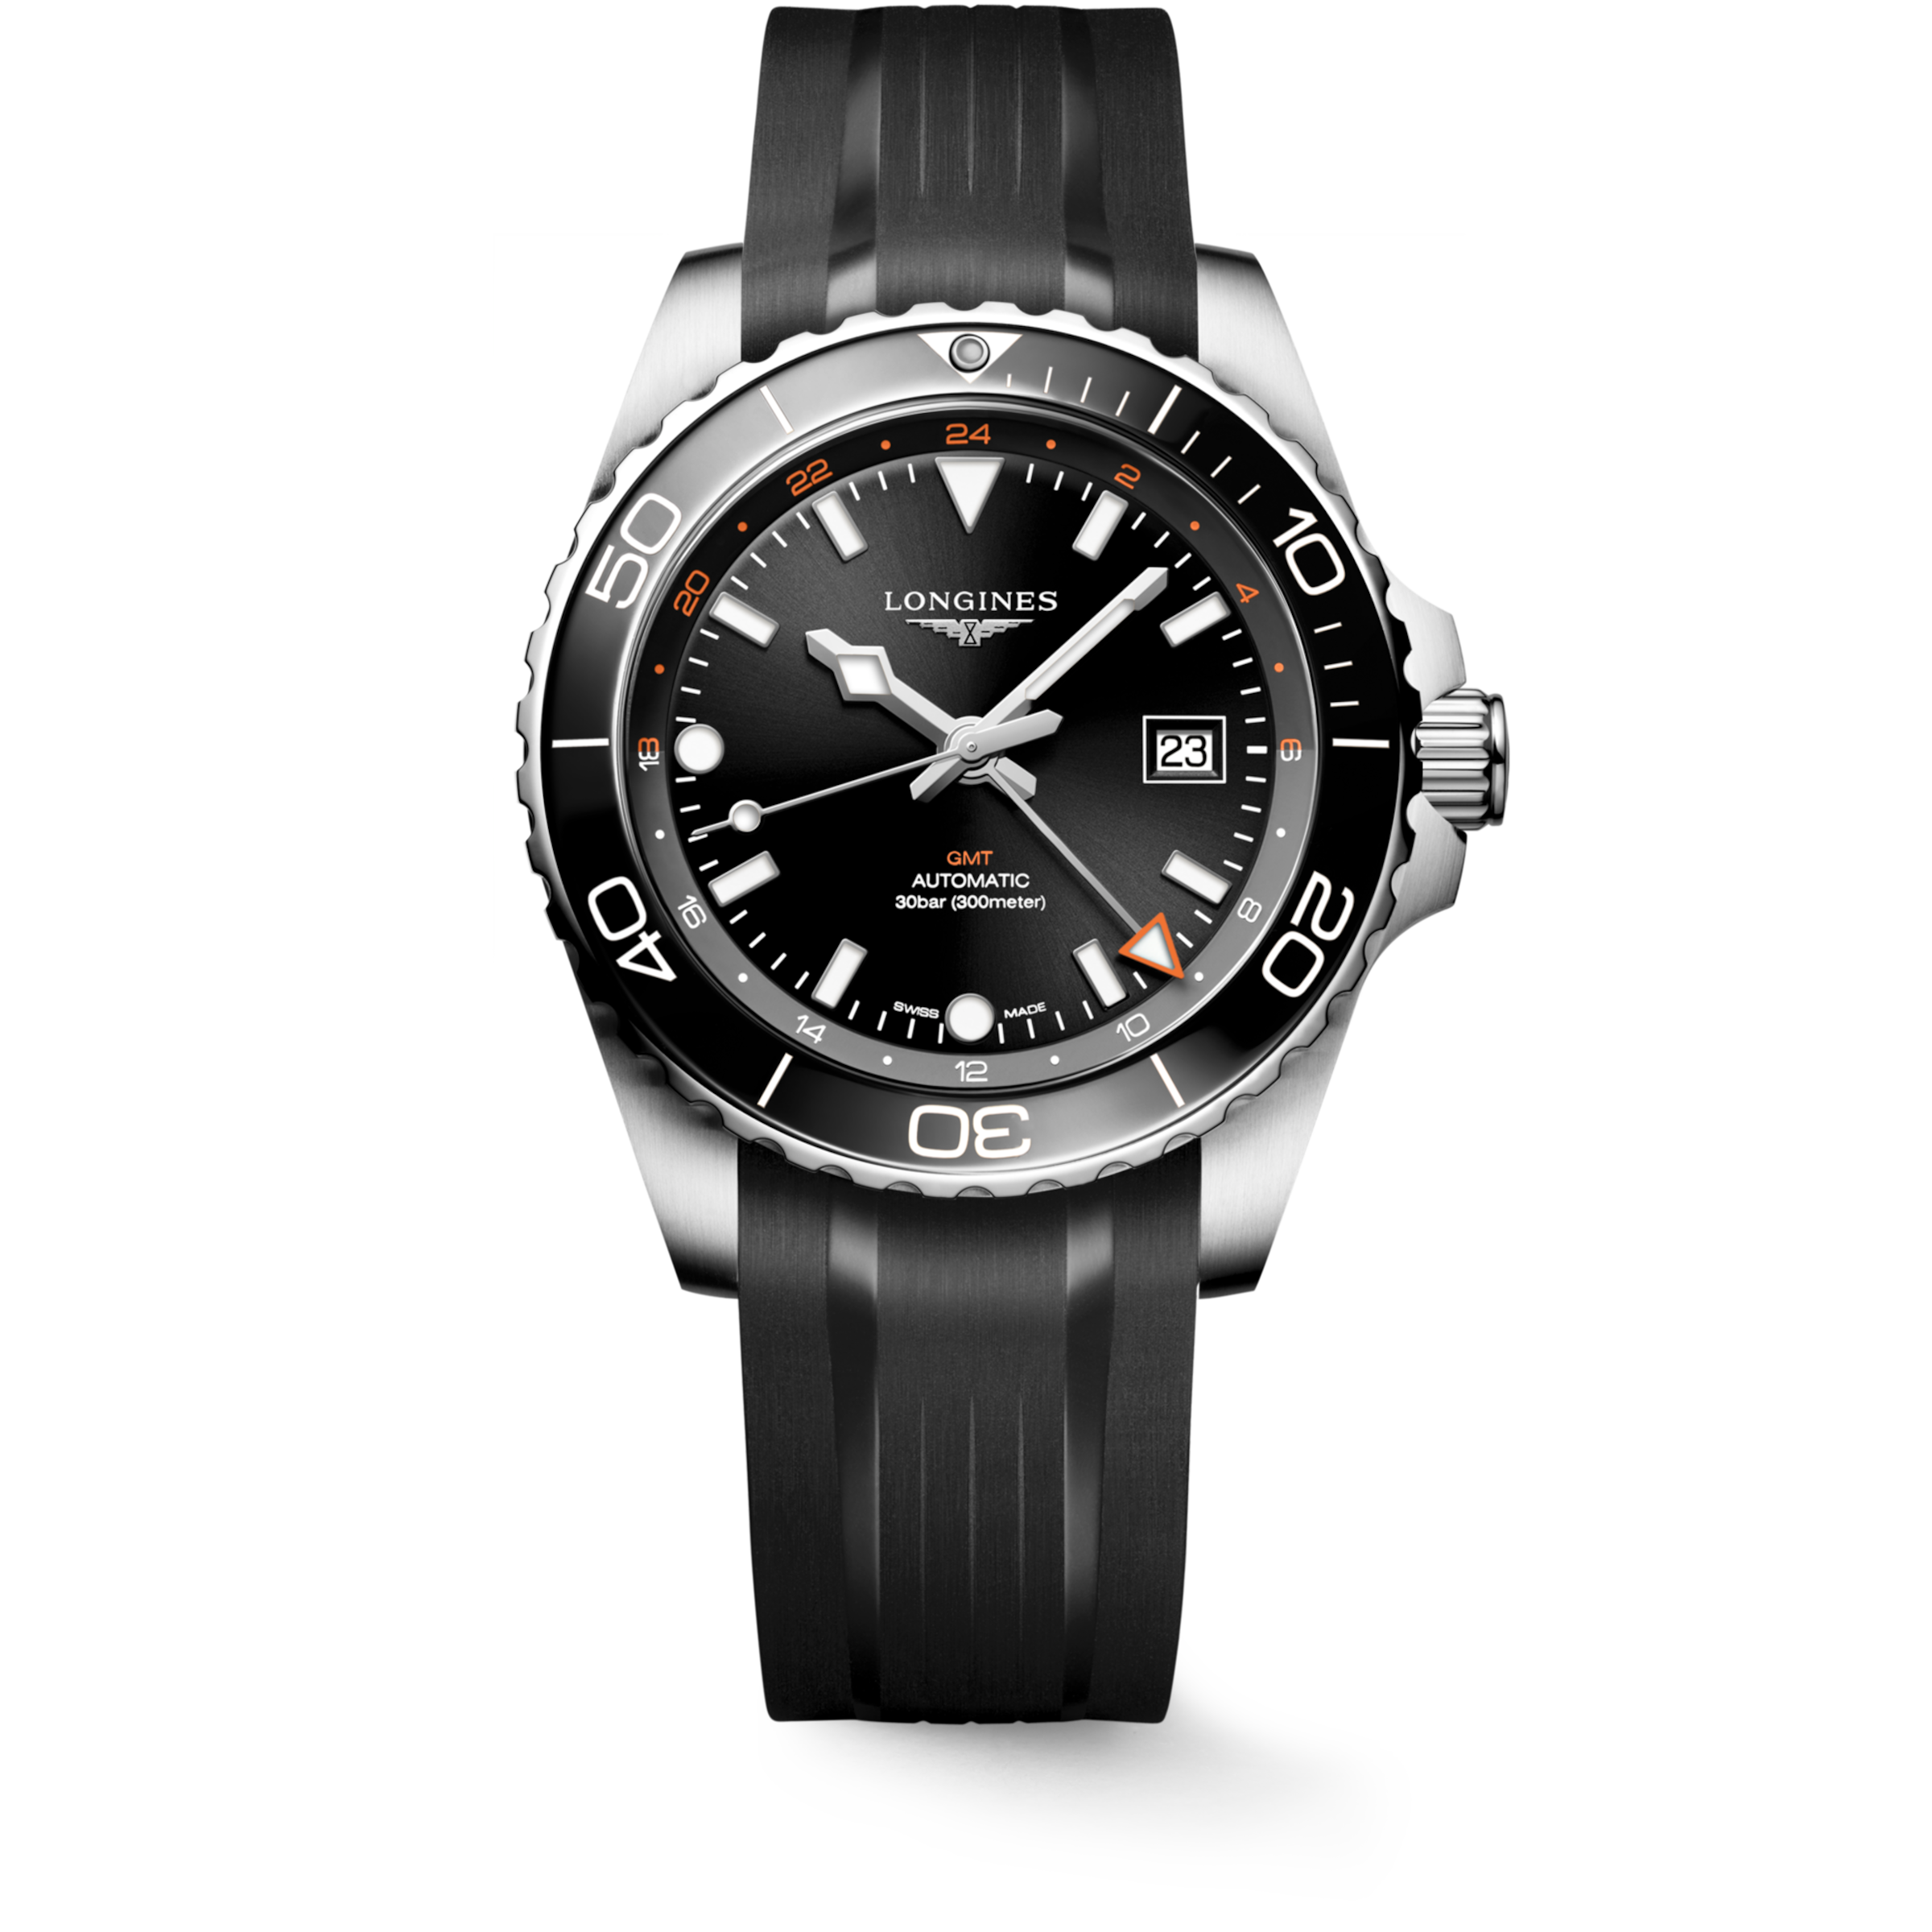 Longines HYDROCONQUEST Automatic Stainless steel and ceramic bezel Watch - L3.890.4.56.9